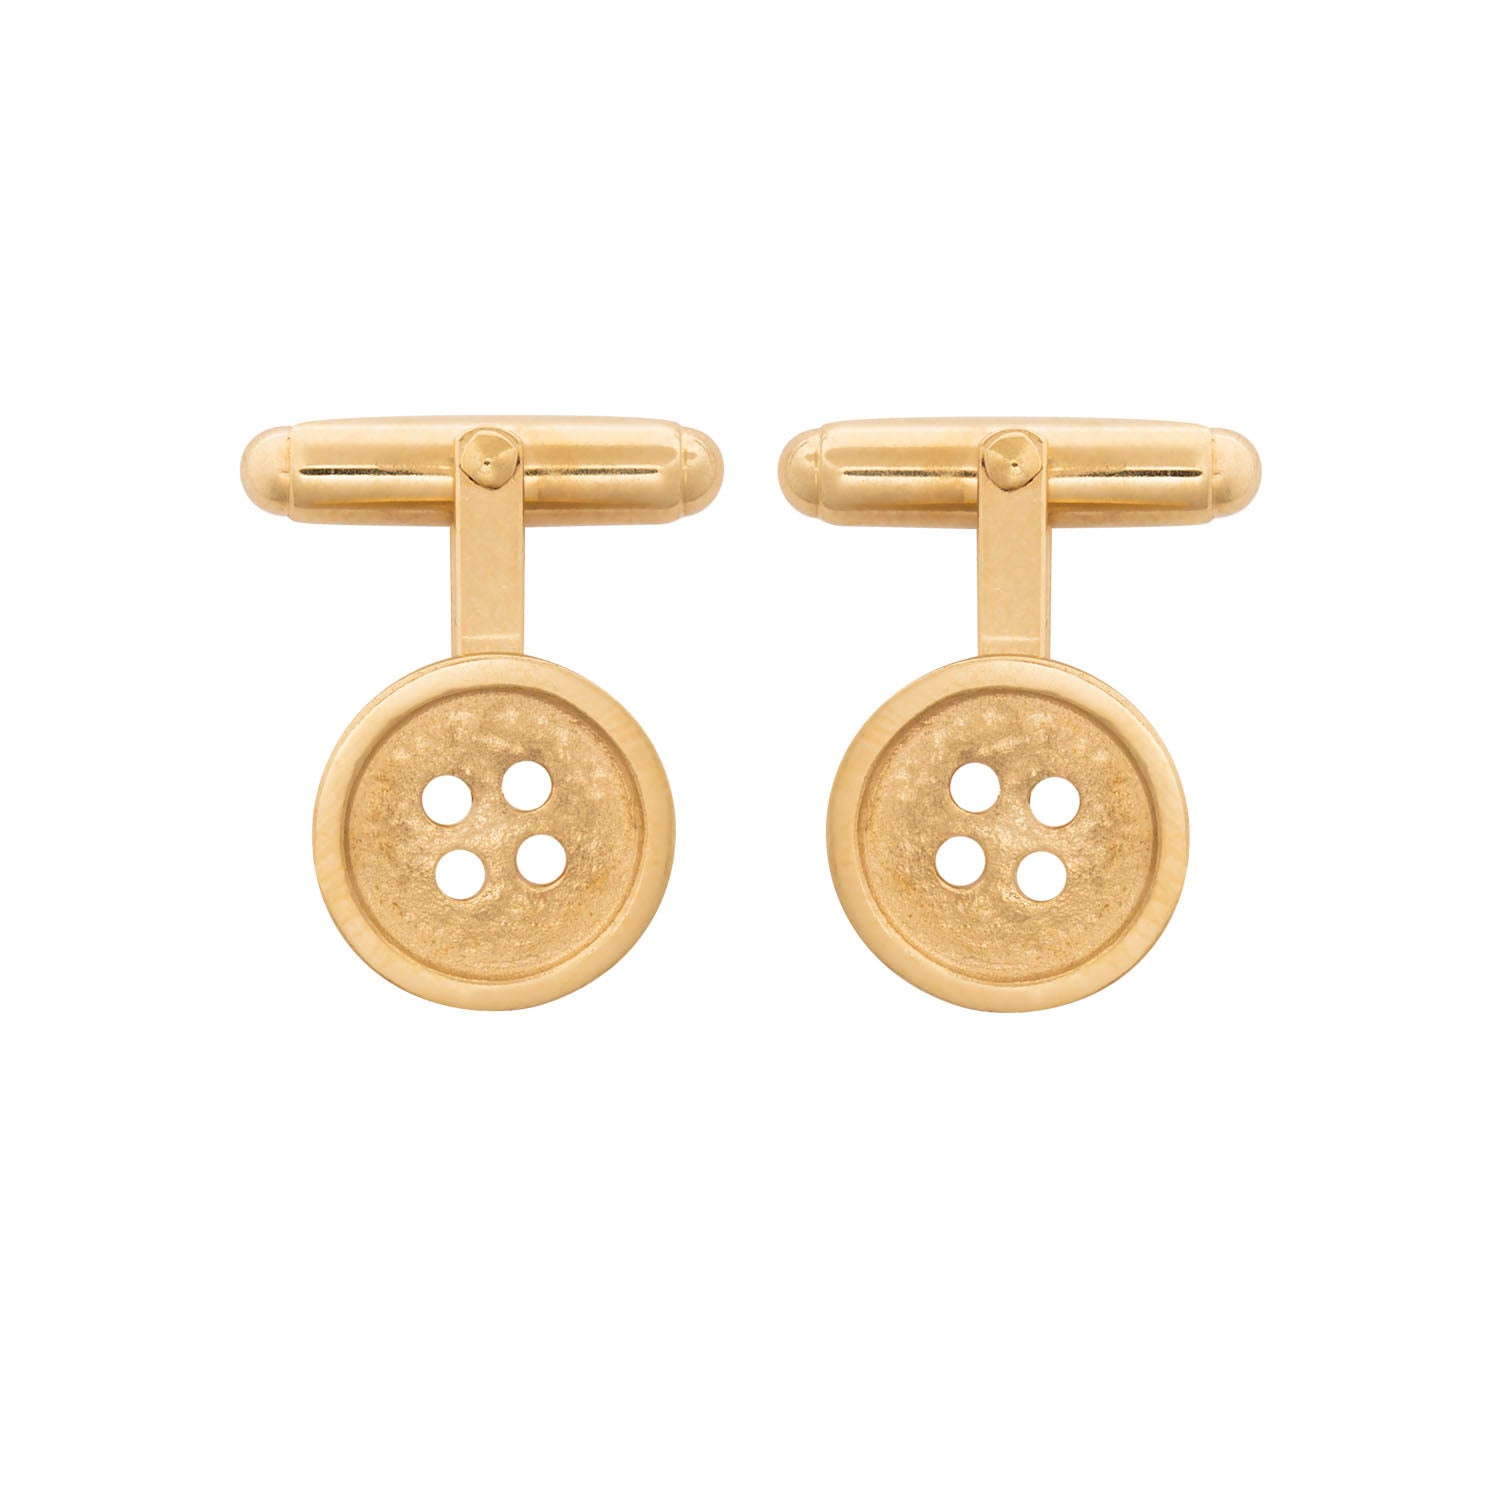 Button Cufflinks in Sterling Silver | Edge Only jewelry Ireland